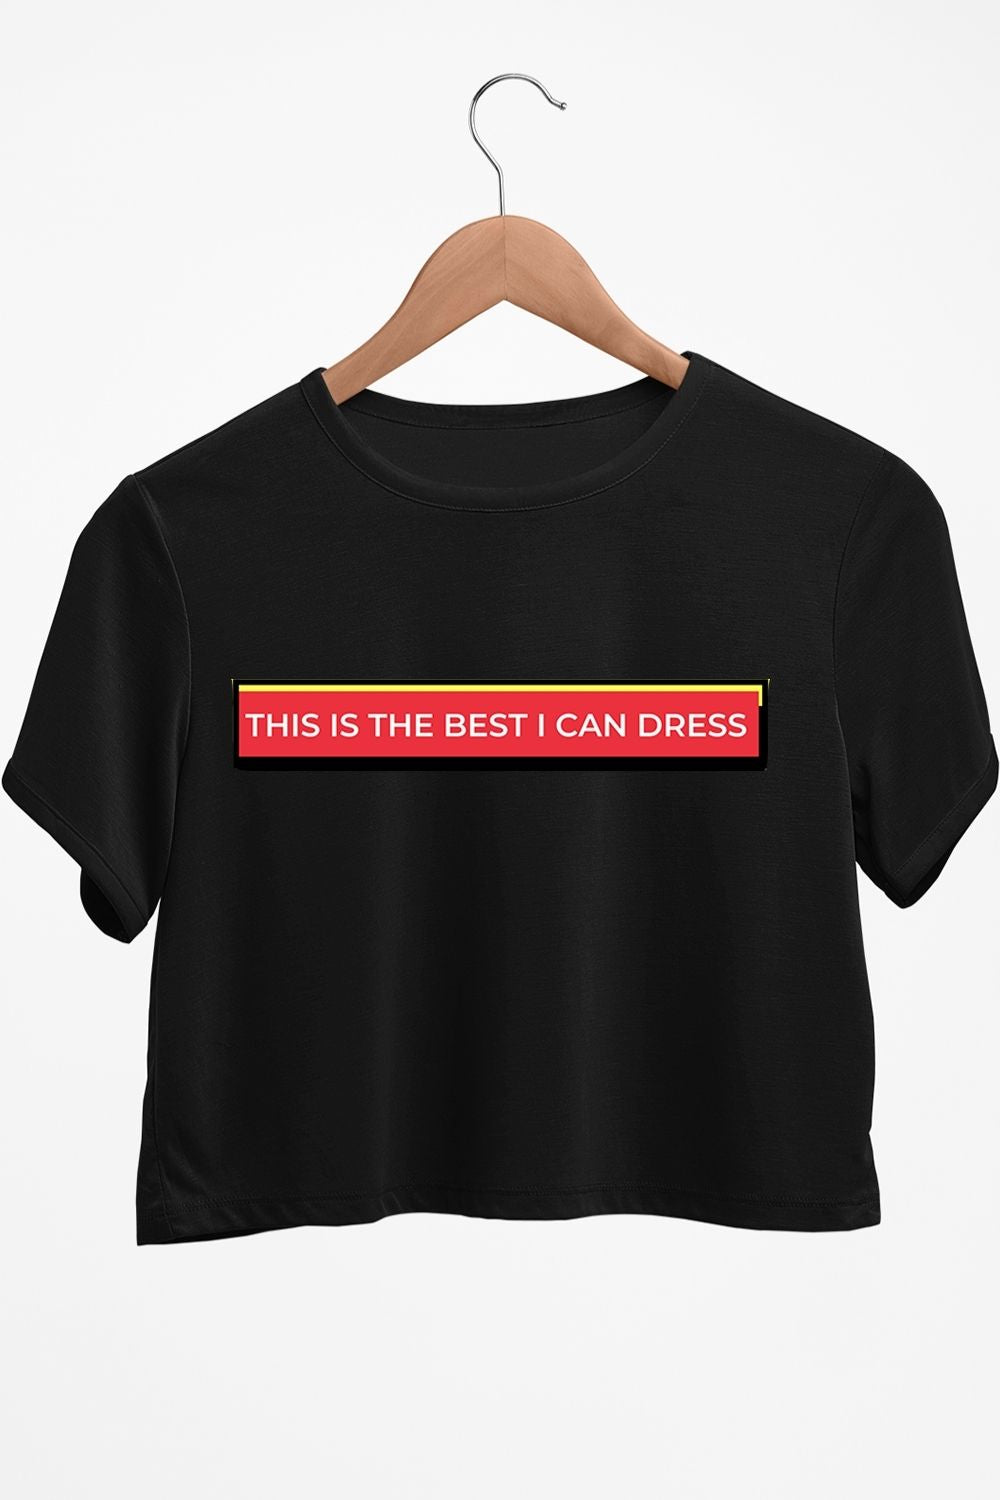 Best I Can Dress Graphic Printed Black Crop Top